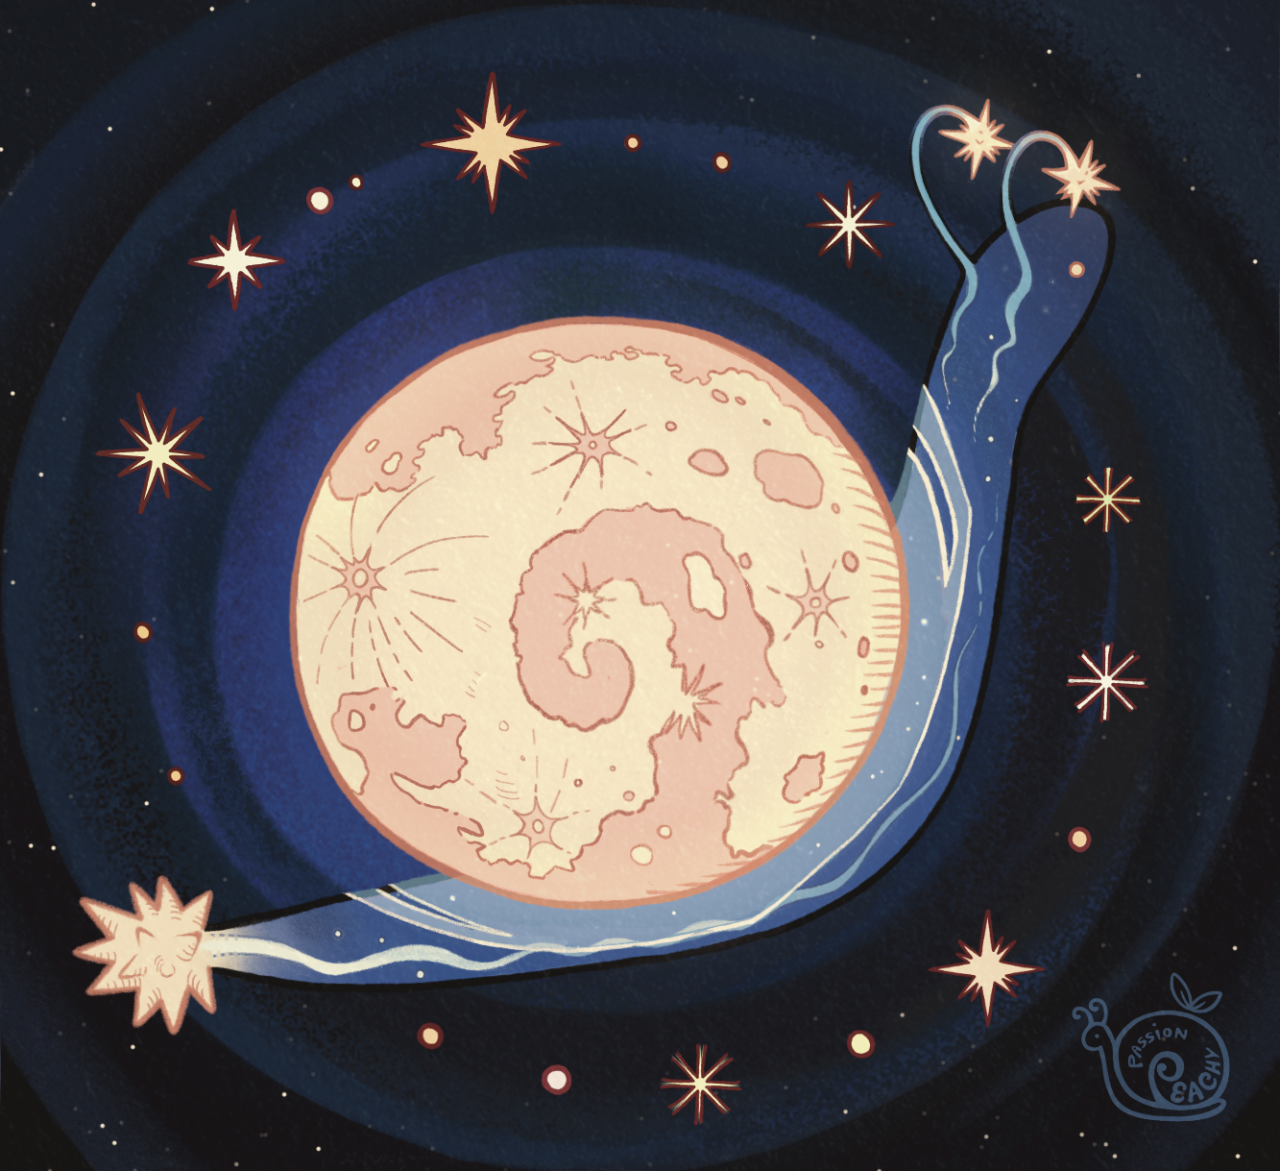 A starry blue snail with a glowing full moon for a shell, yellow eyes, and shooting stars for antennae. Its tail is a slightly bigger shooting star with the trail traveling up its body. The craters of the moon form the curl of the snail’s shell. The background is dark blue space with a radial pattern of yellow stars around the center. A snail-shaped watermark that says “passionpeachy” is on the bottom right corner.